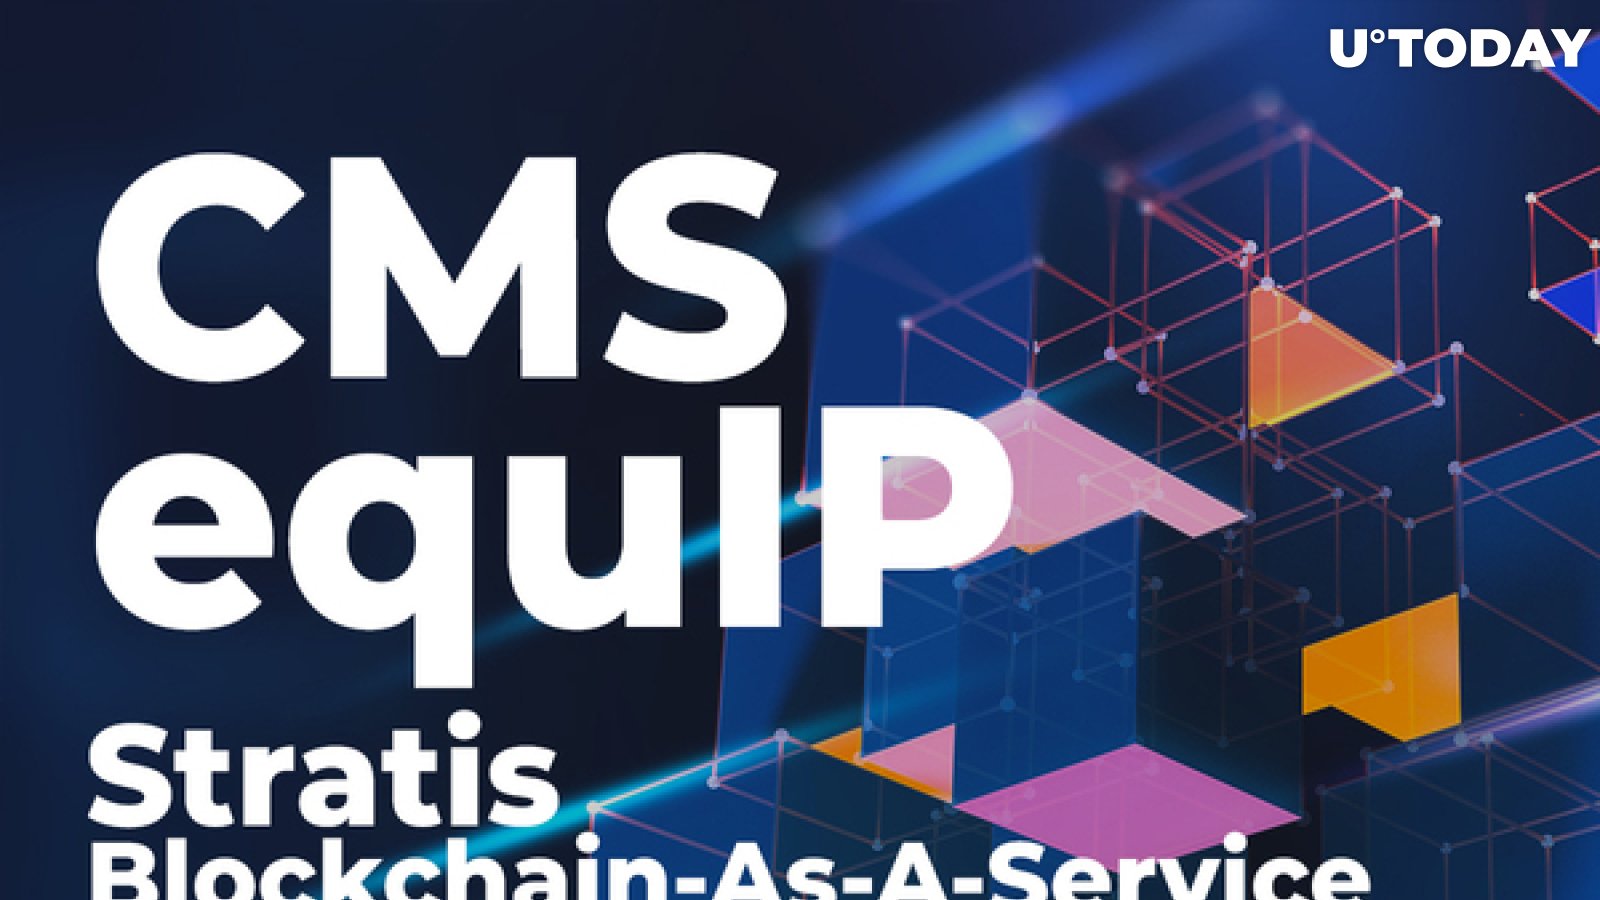 Microsoft-Focused Stratis Blockchain-as-a-Service Firm Picked by CMS equIP Program